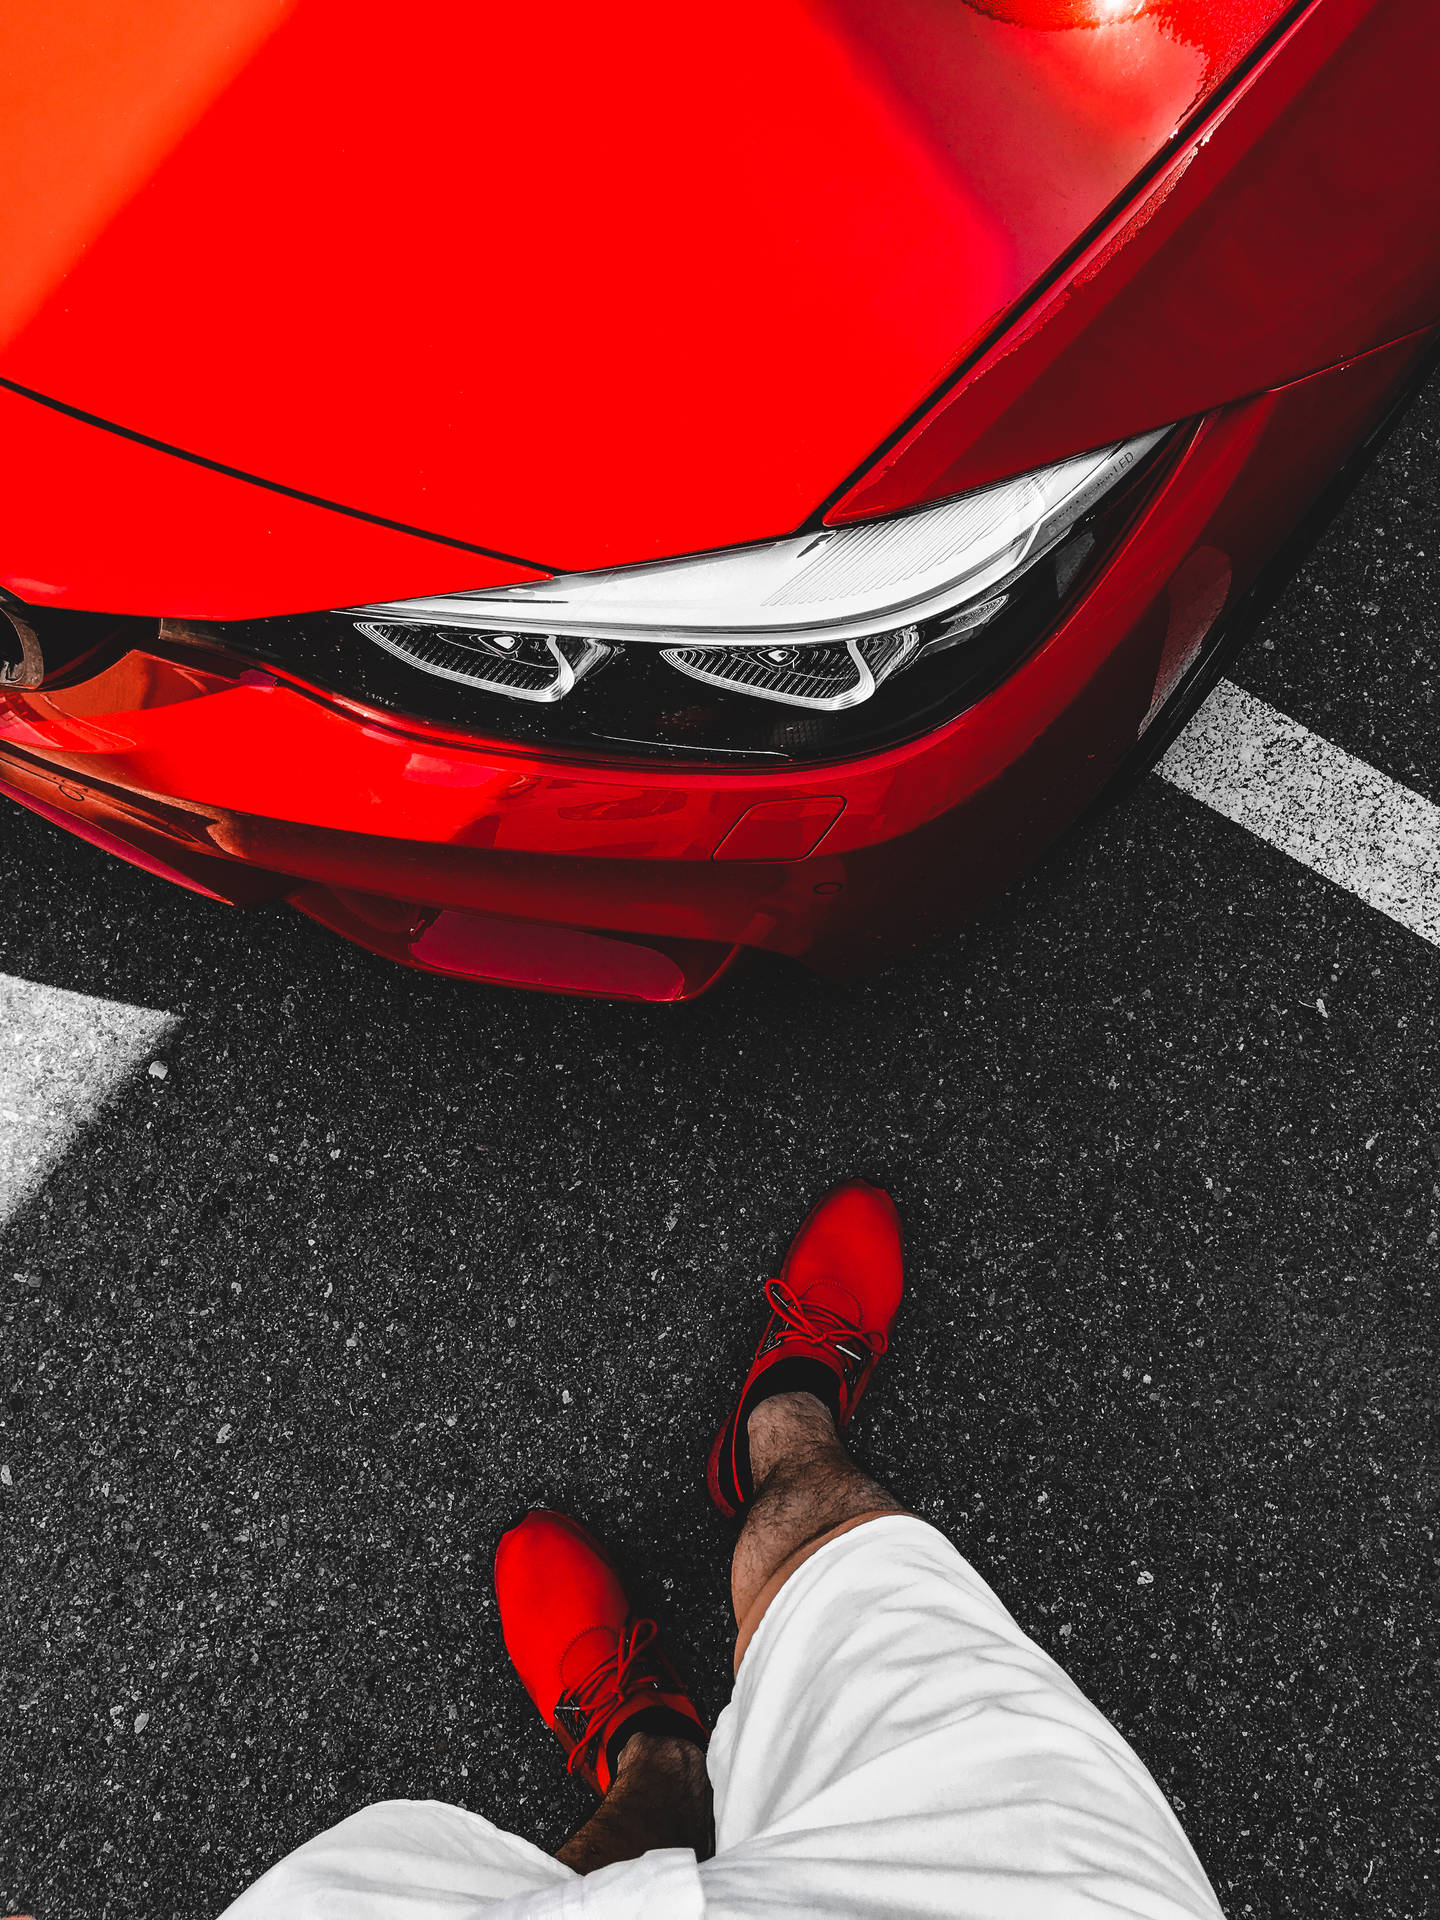 Iphone 8 Red Shoes And Car Wallpaper